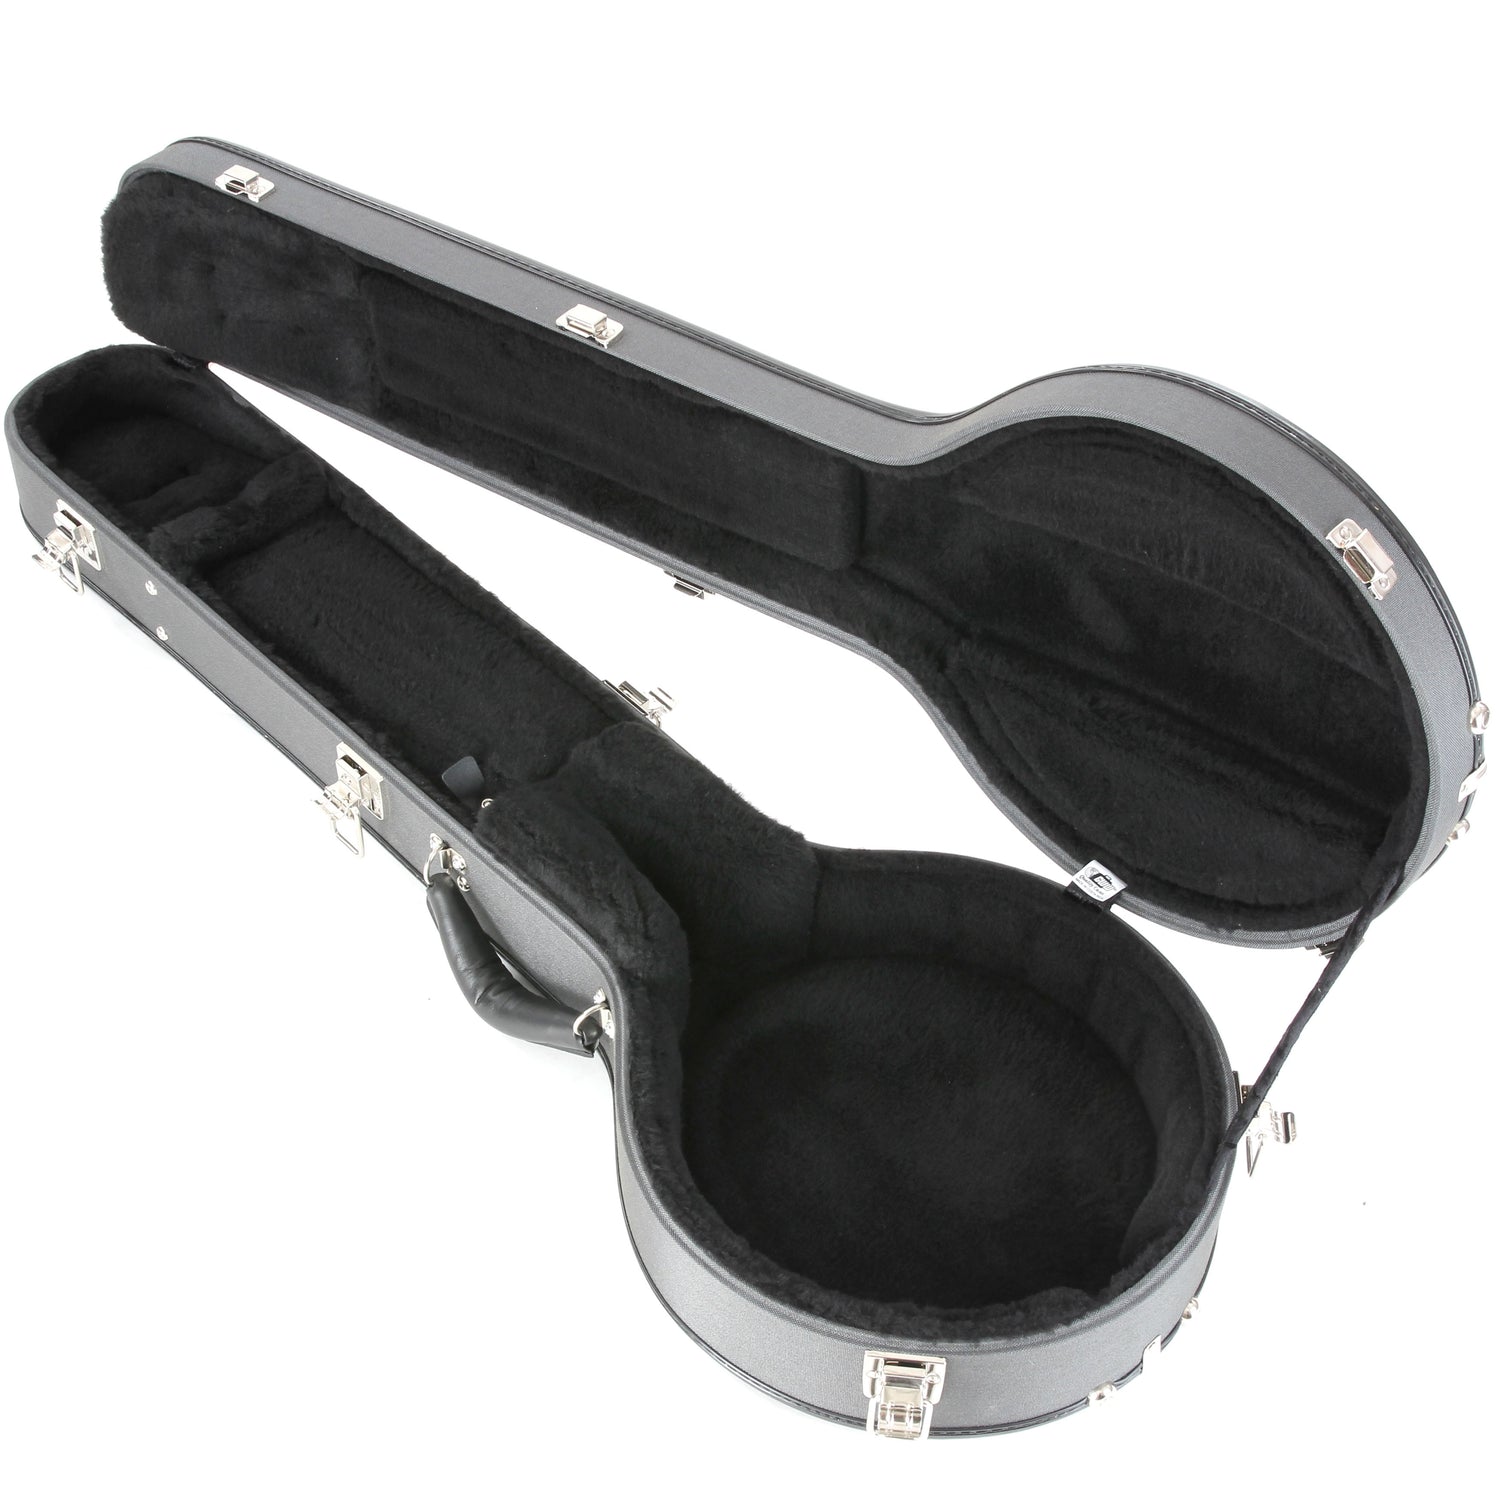 Image 2 of Ameritage Silver Series Banjo Case - SKU# ASSC2-OB12 : Product Type Accessories & Parts : Elderly Instruments